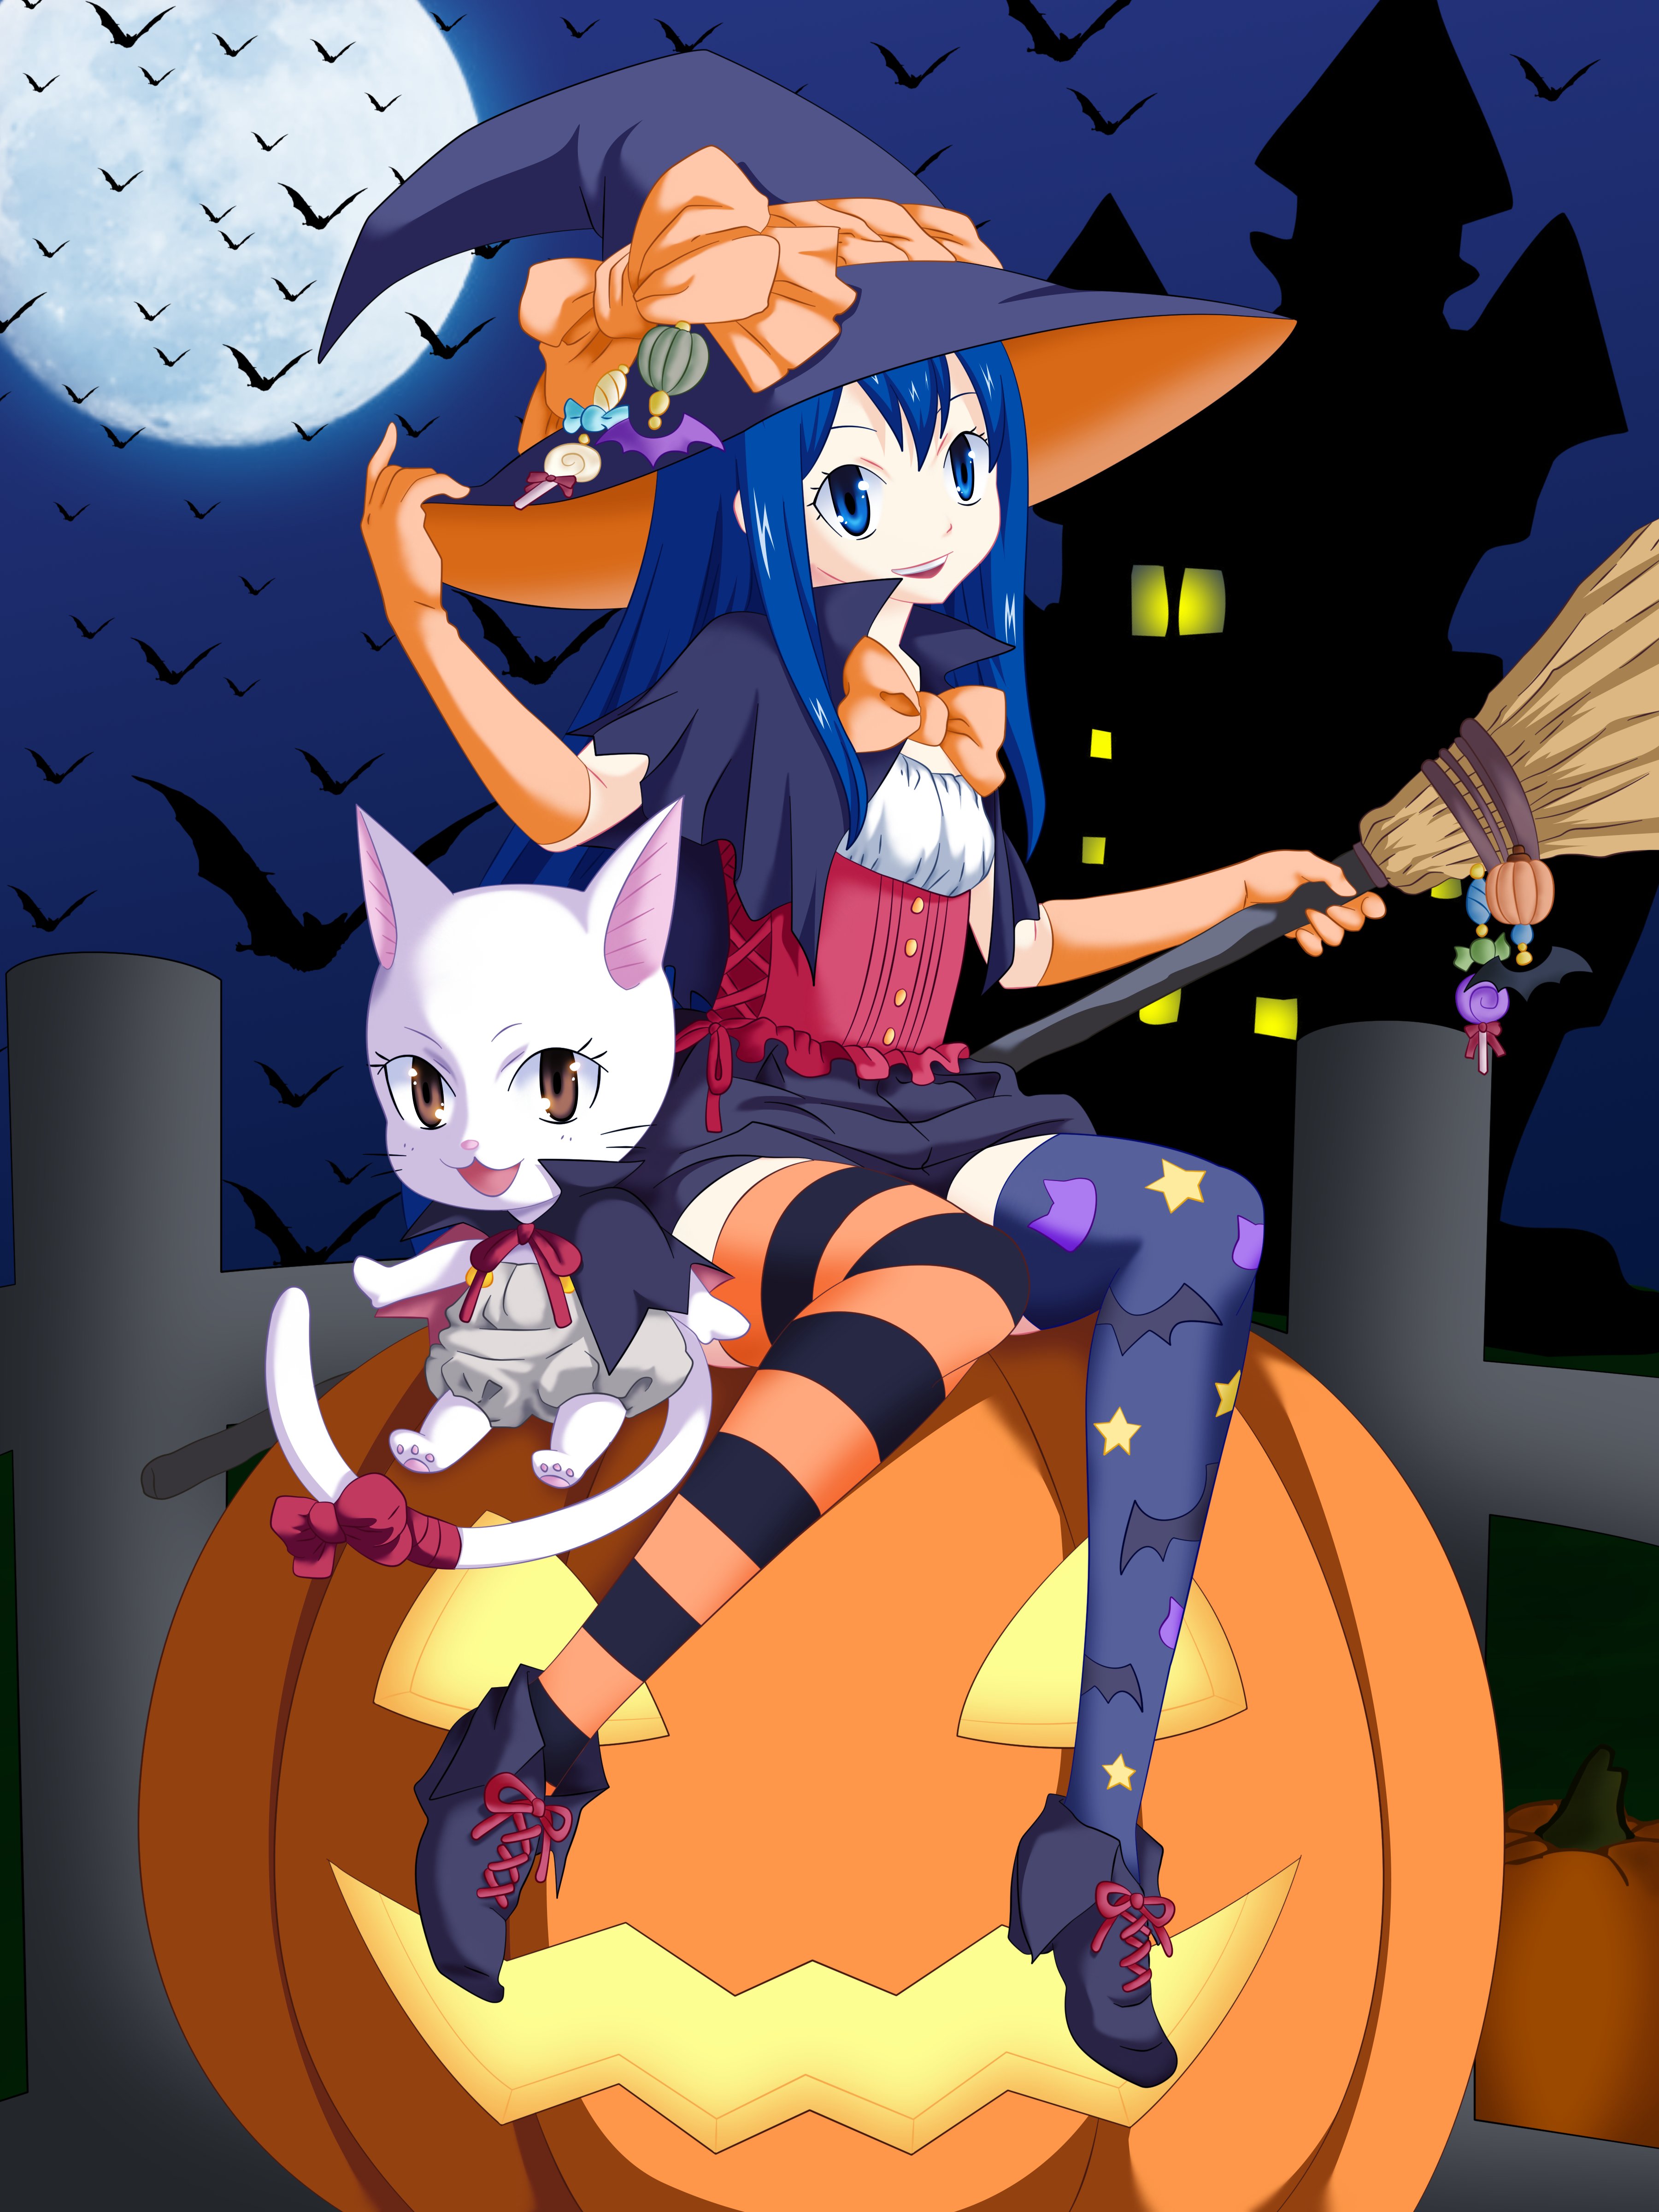 anime, Series, Characters, Fairy, Tail, Girl, Animal, Blue, Eyes, Blue, Hair, Brown, Eyes, Cat, Cloak, Halloween, Happy, Hat, Long, Hair, Moon, Night, Ribbon, Shorts, Sky, Stars, Sweets, Thigh, Highs, Witch Wallpaper